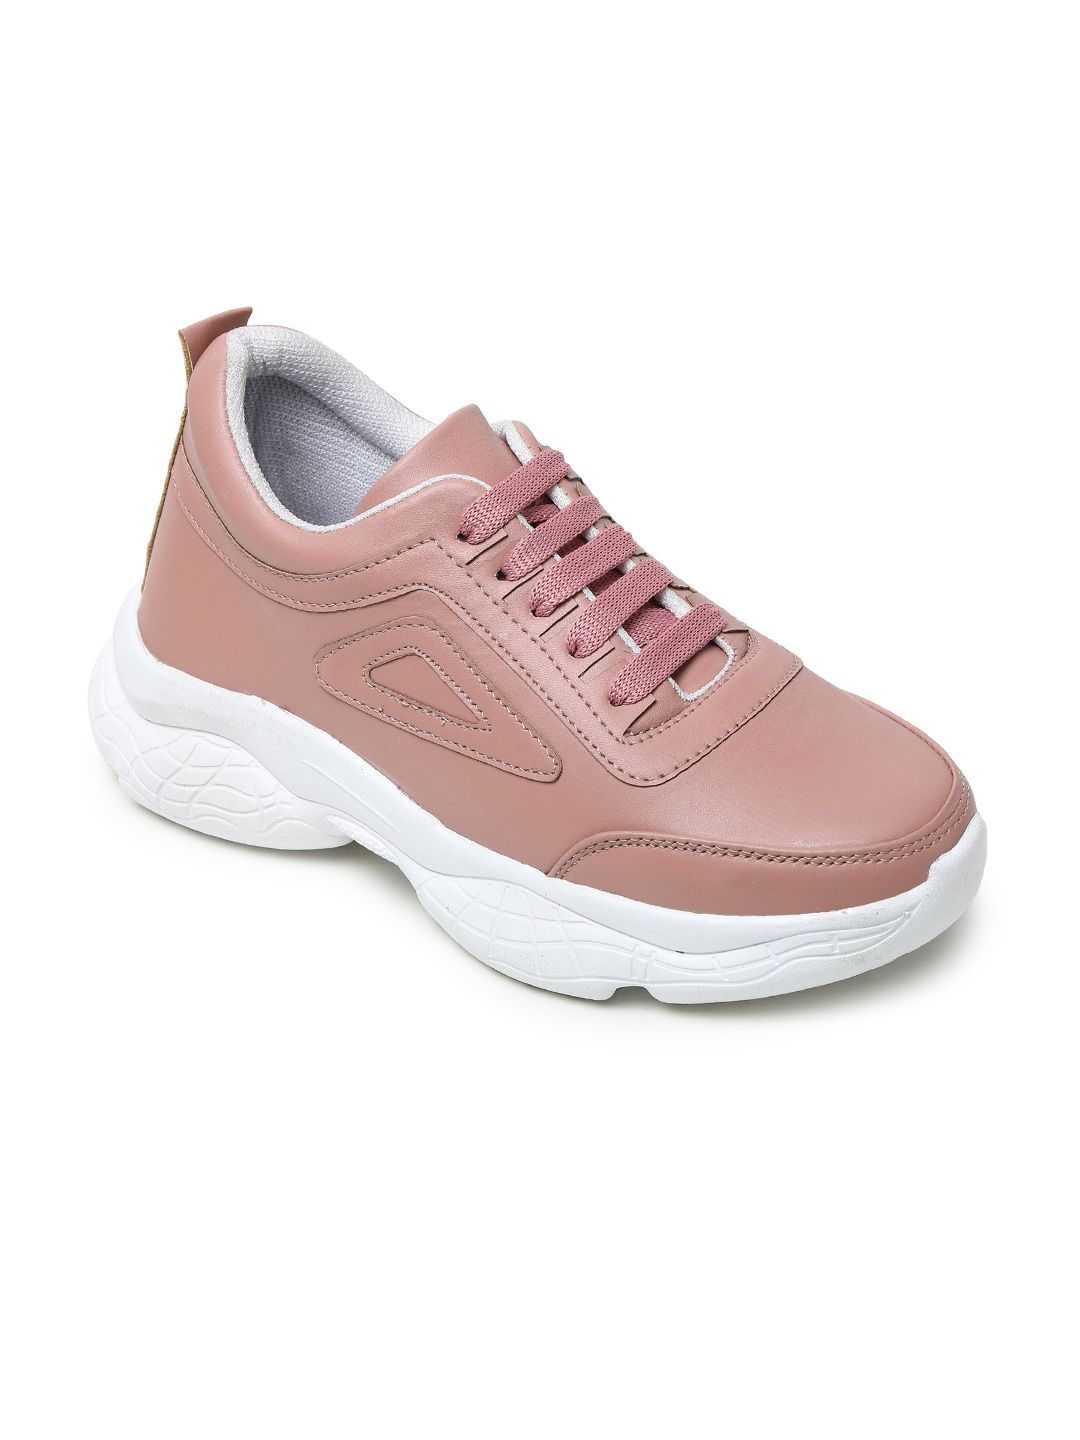 BOOTCO Women Peach-Coloured Textured Sneakers Price in India